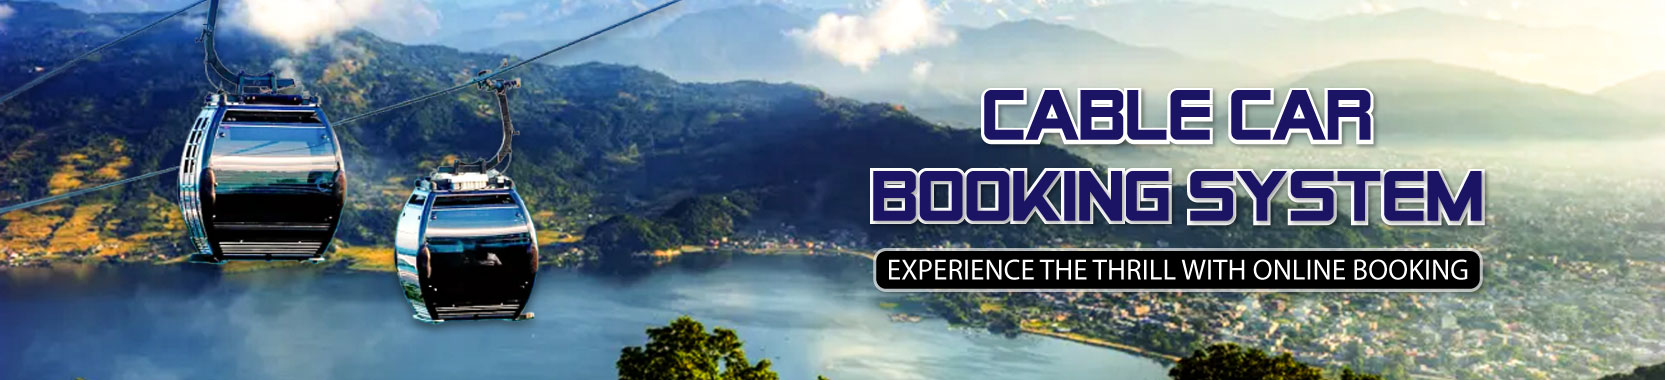 Cable Car Booking System